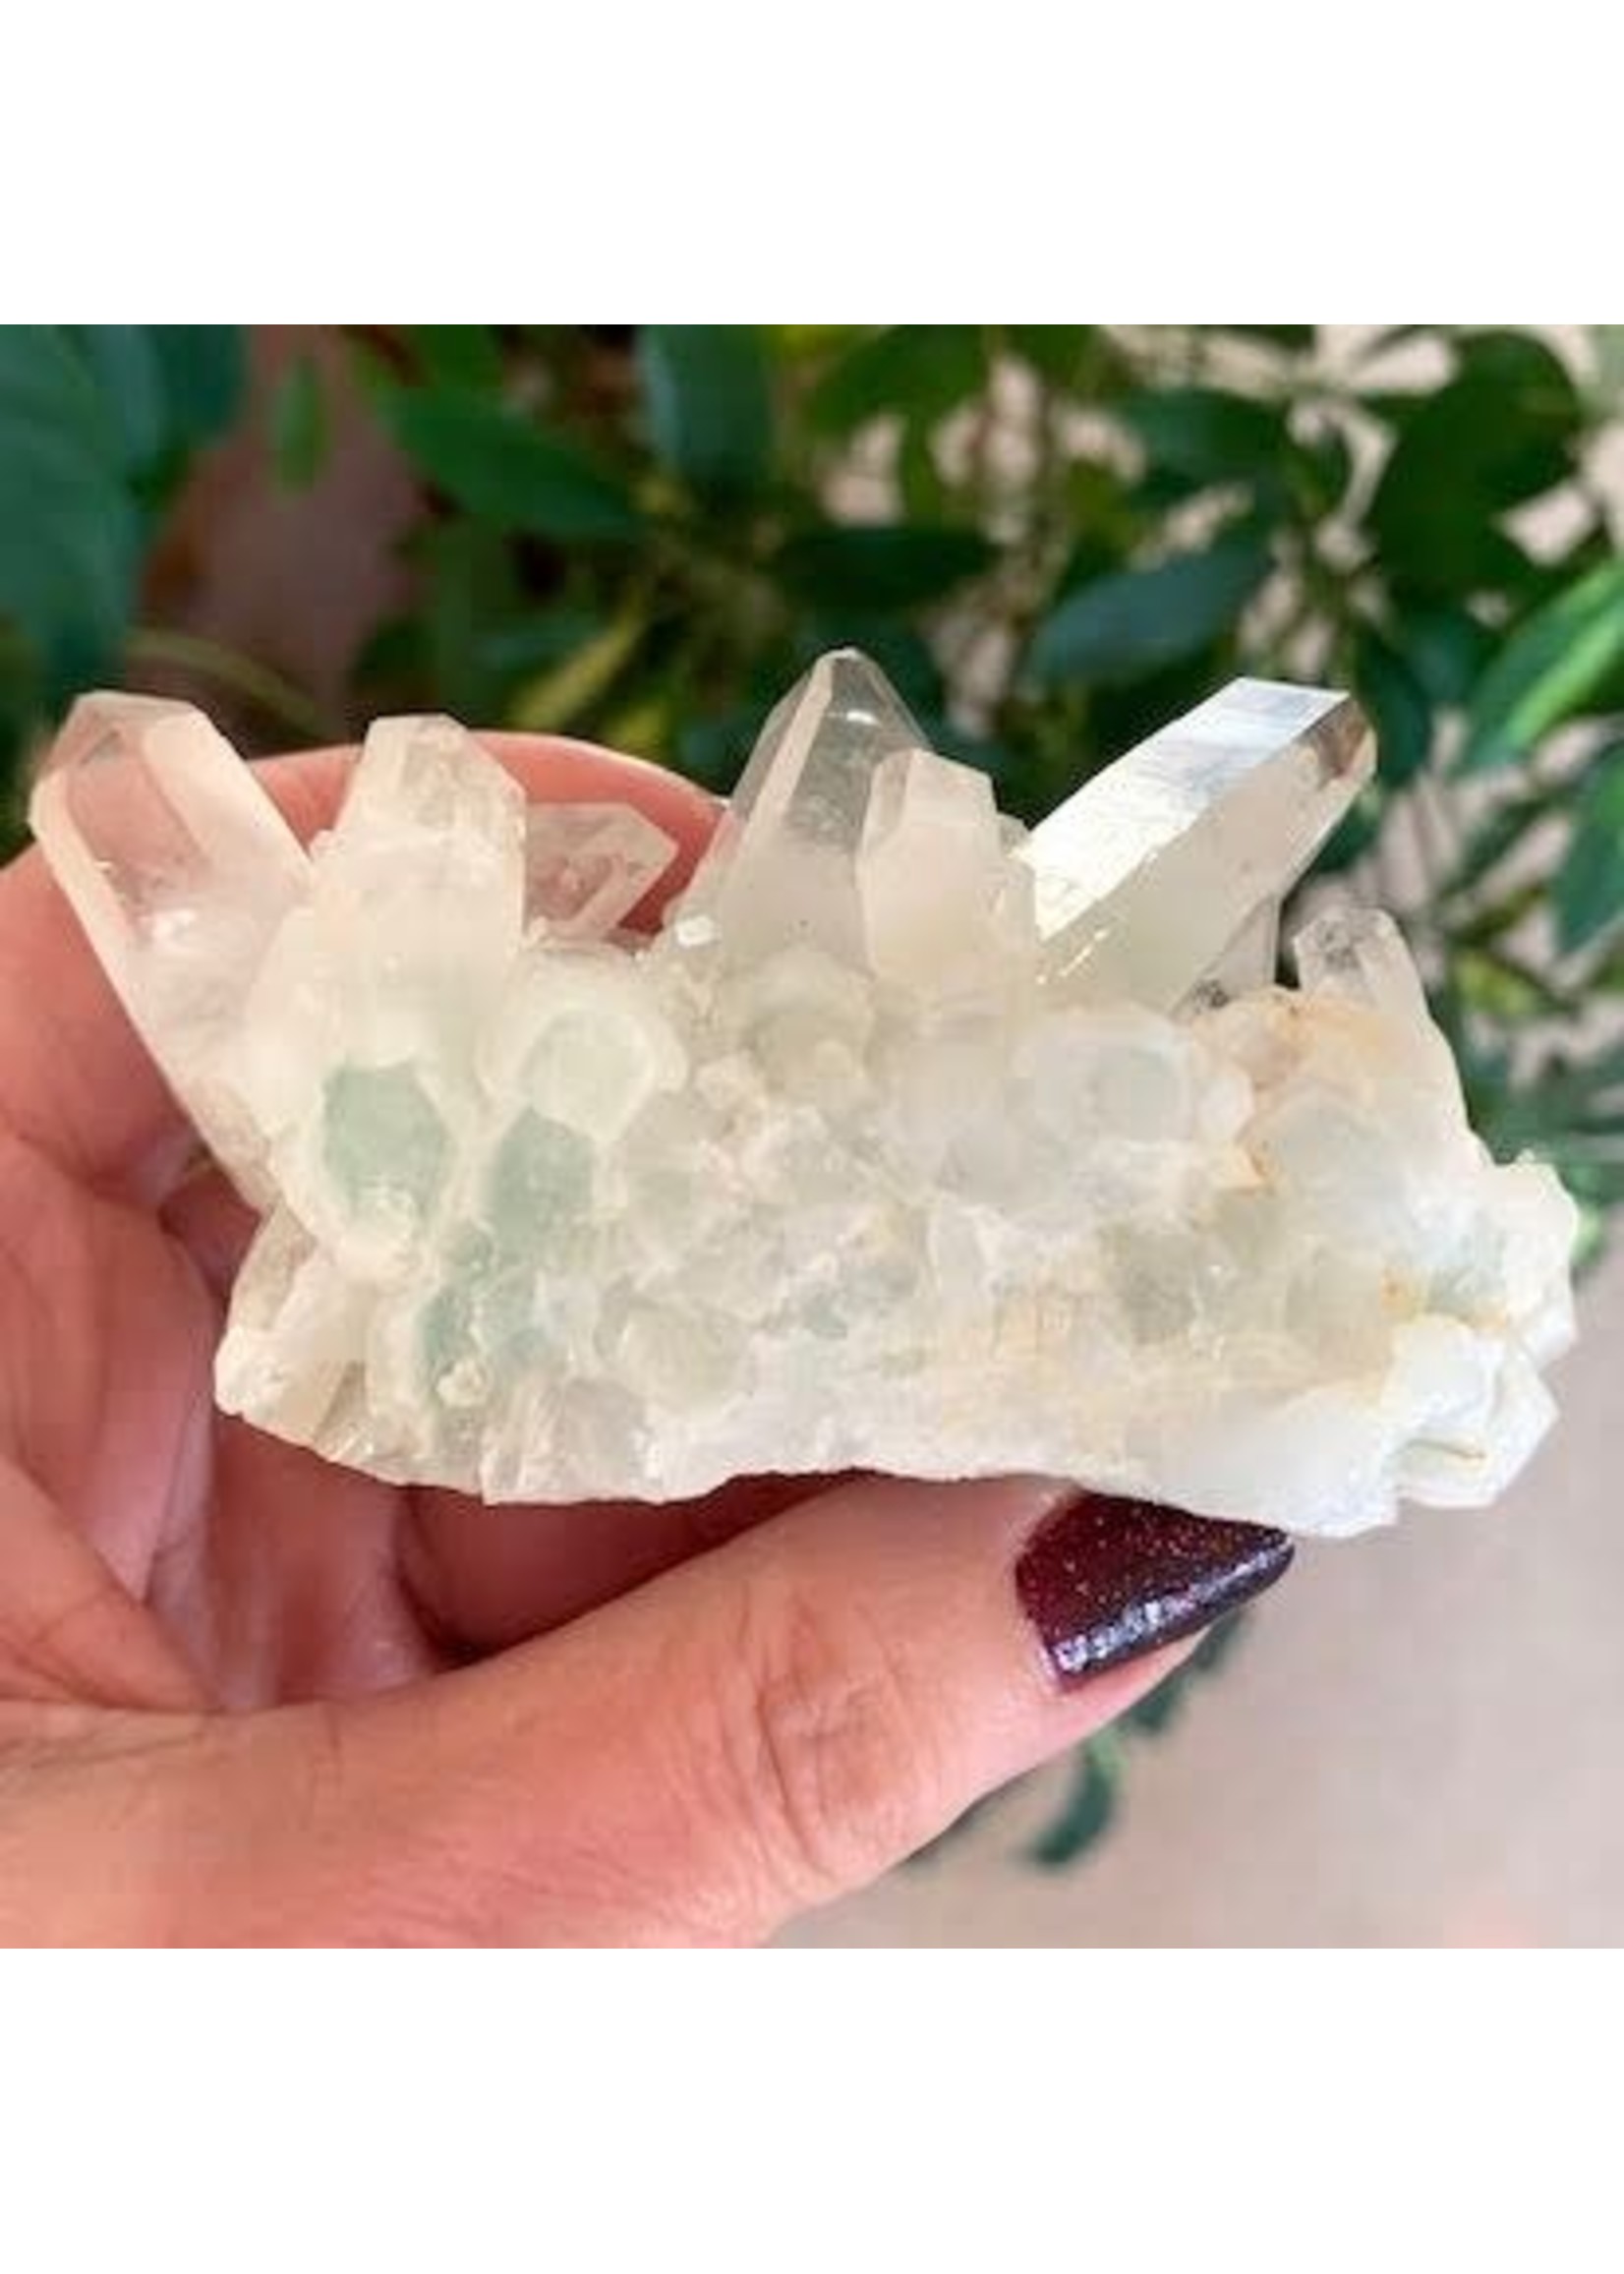 Quartz with Fuchsite Phantoms Clusters for rejoicing in who you are